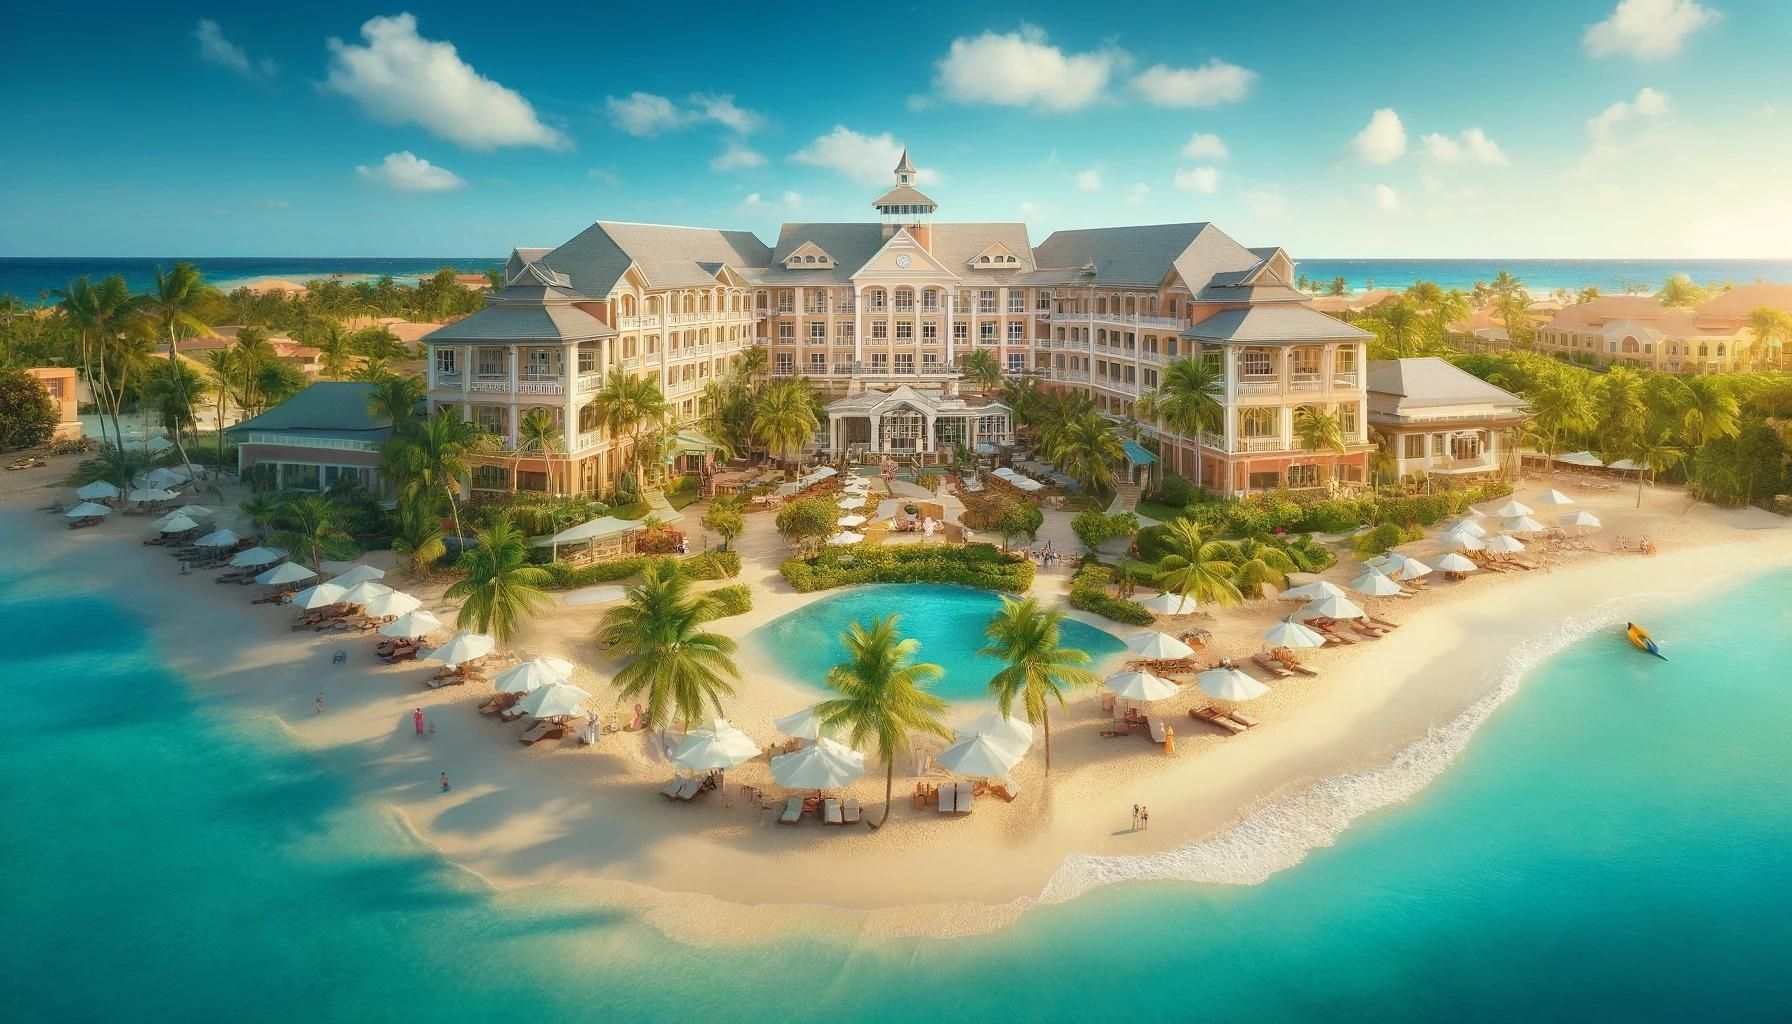 Are There Any Sandals Resorts That Don't Require a Passport